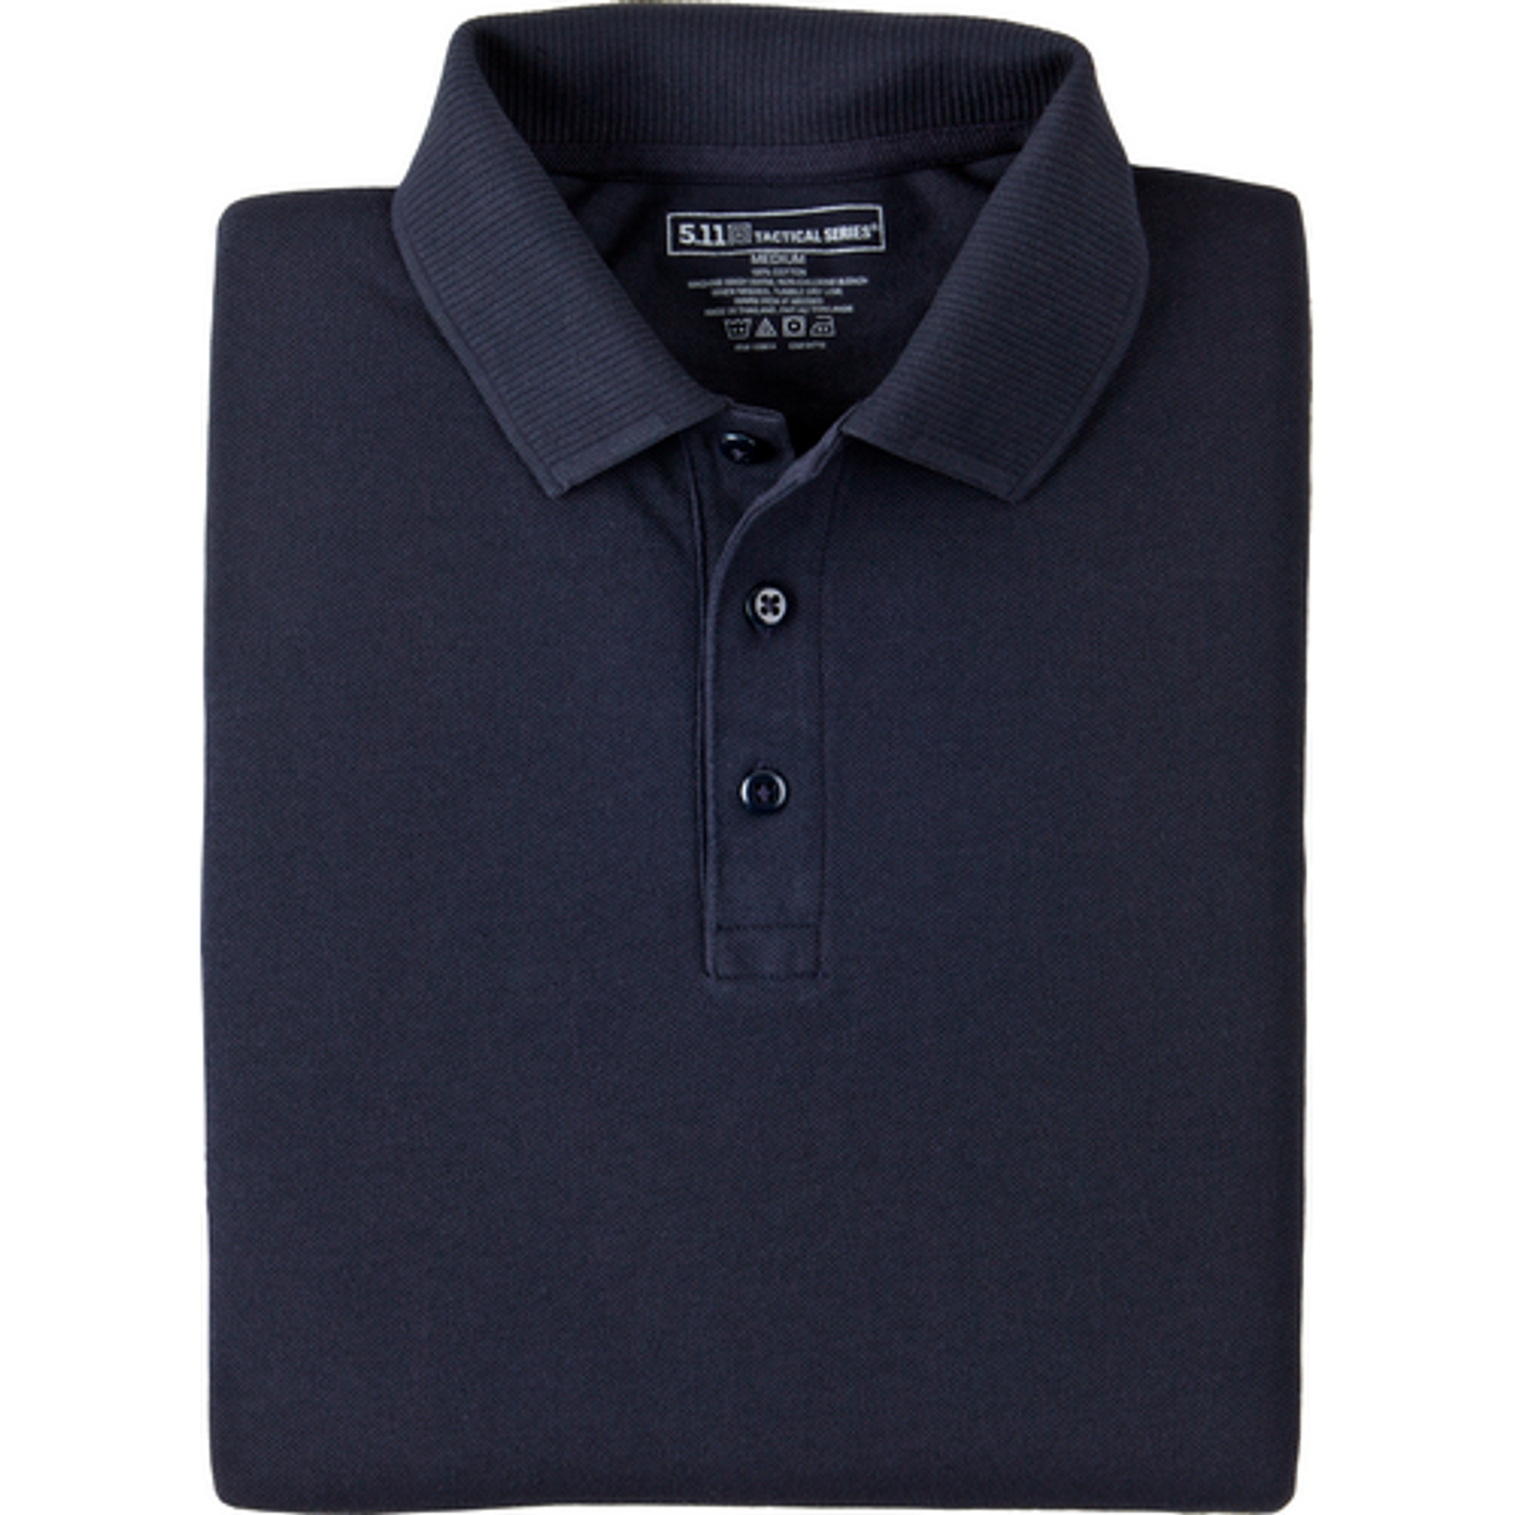 Professional S/s Polo - KR5-41060T724XL